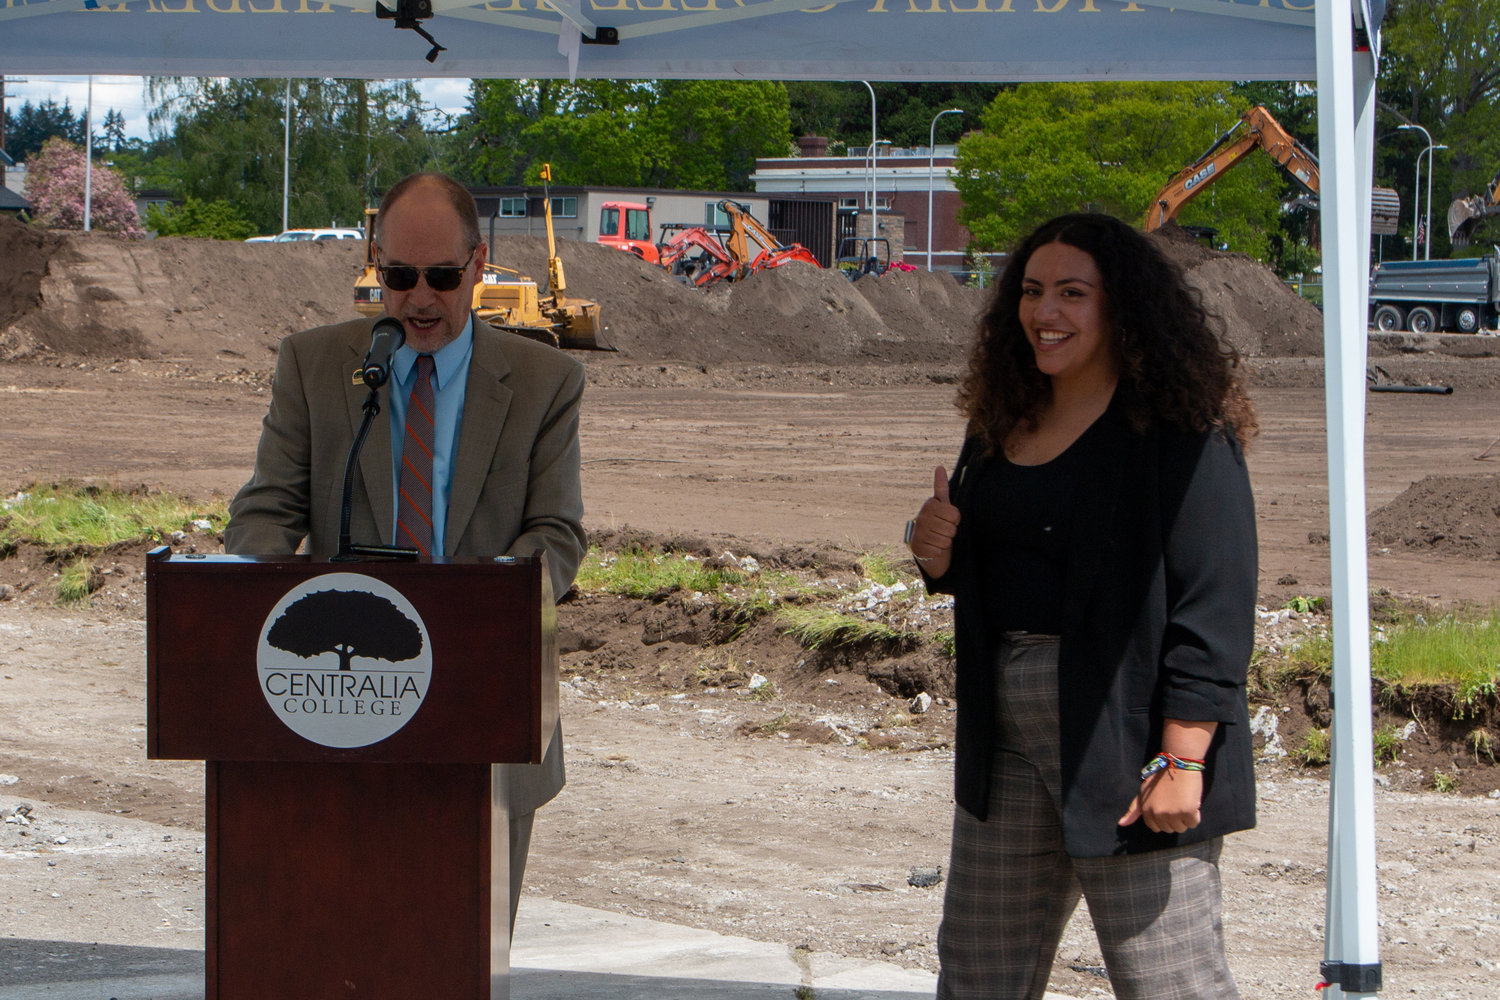 Bob Mohrbacher, Centralia College president, passes off the stand to Marisol Vargas, student body president, for the groundbreaking ceremony of the Centralia College multi-purpose athletic field Wednesday afternoon.